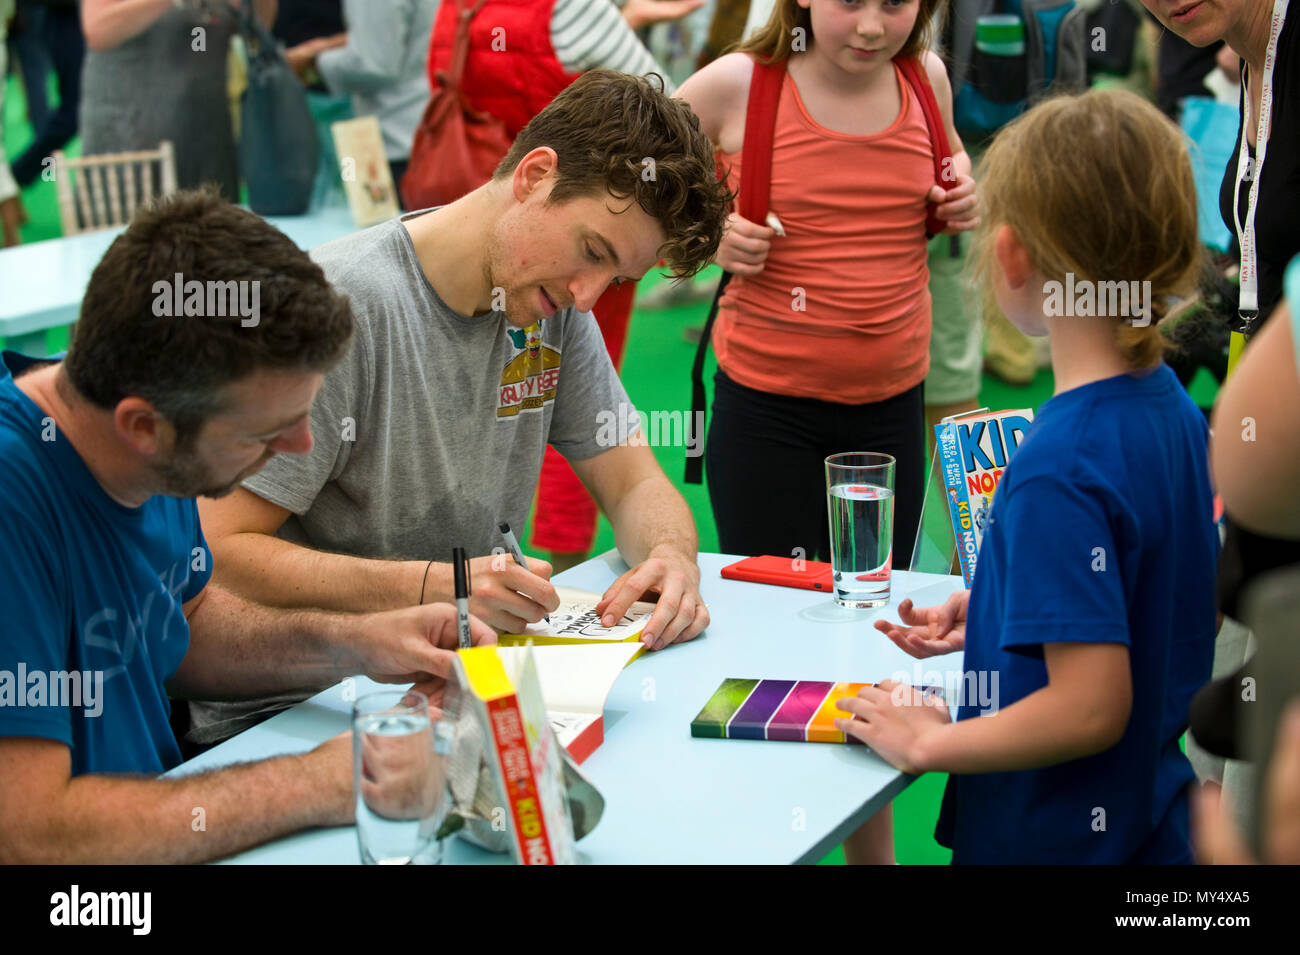 Greg James & Chris Smith book signing for fans in the bookshop at Hay Festival 2018 Hay-on-Wye Powys Wales UK Stock Photo